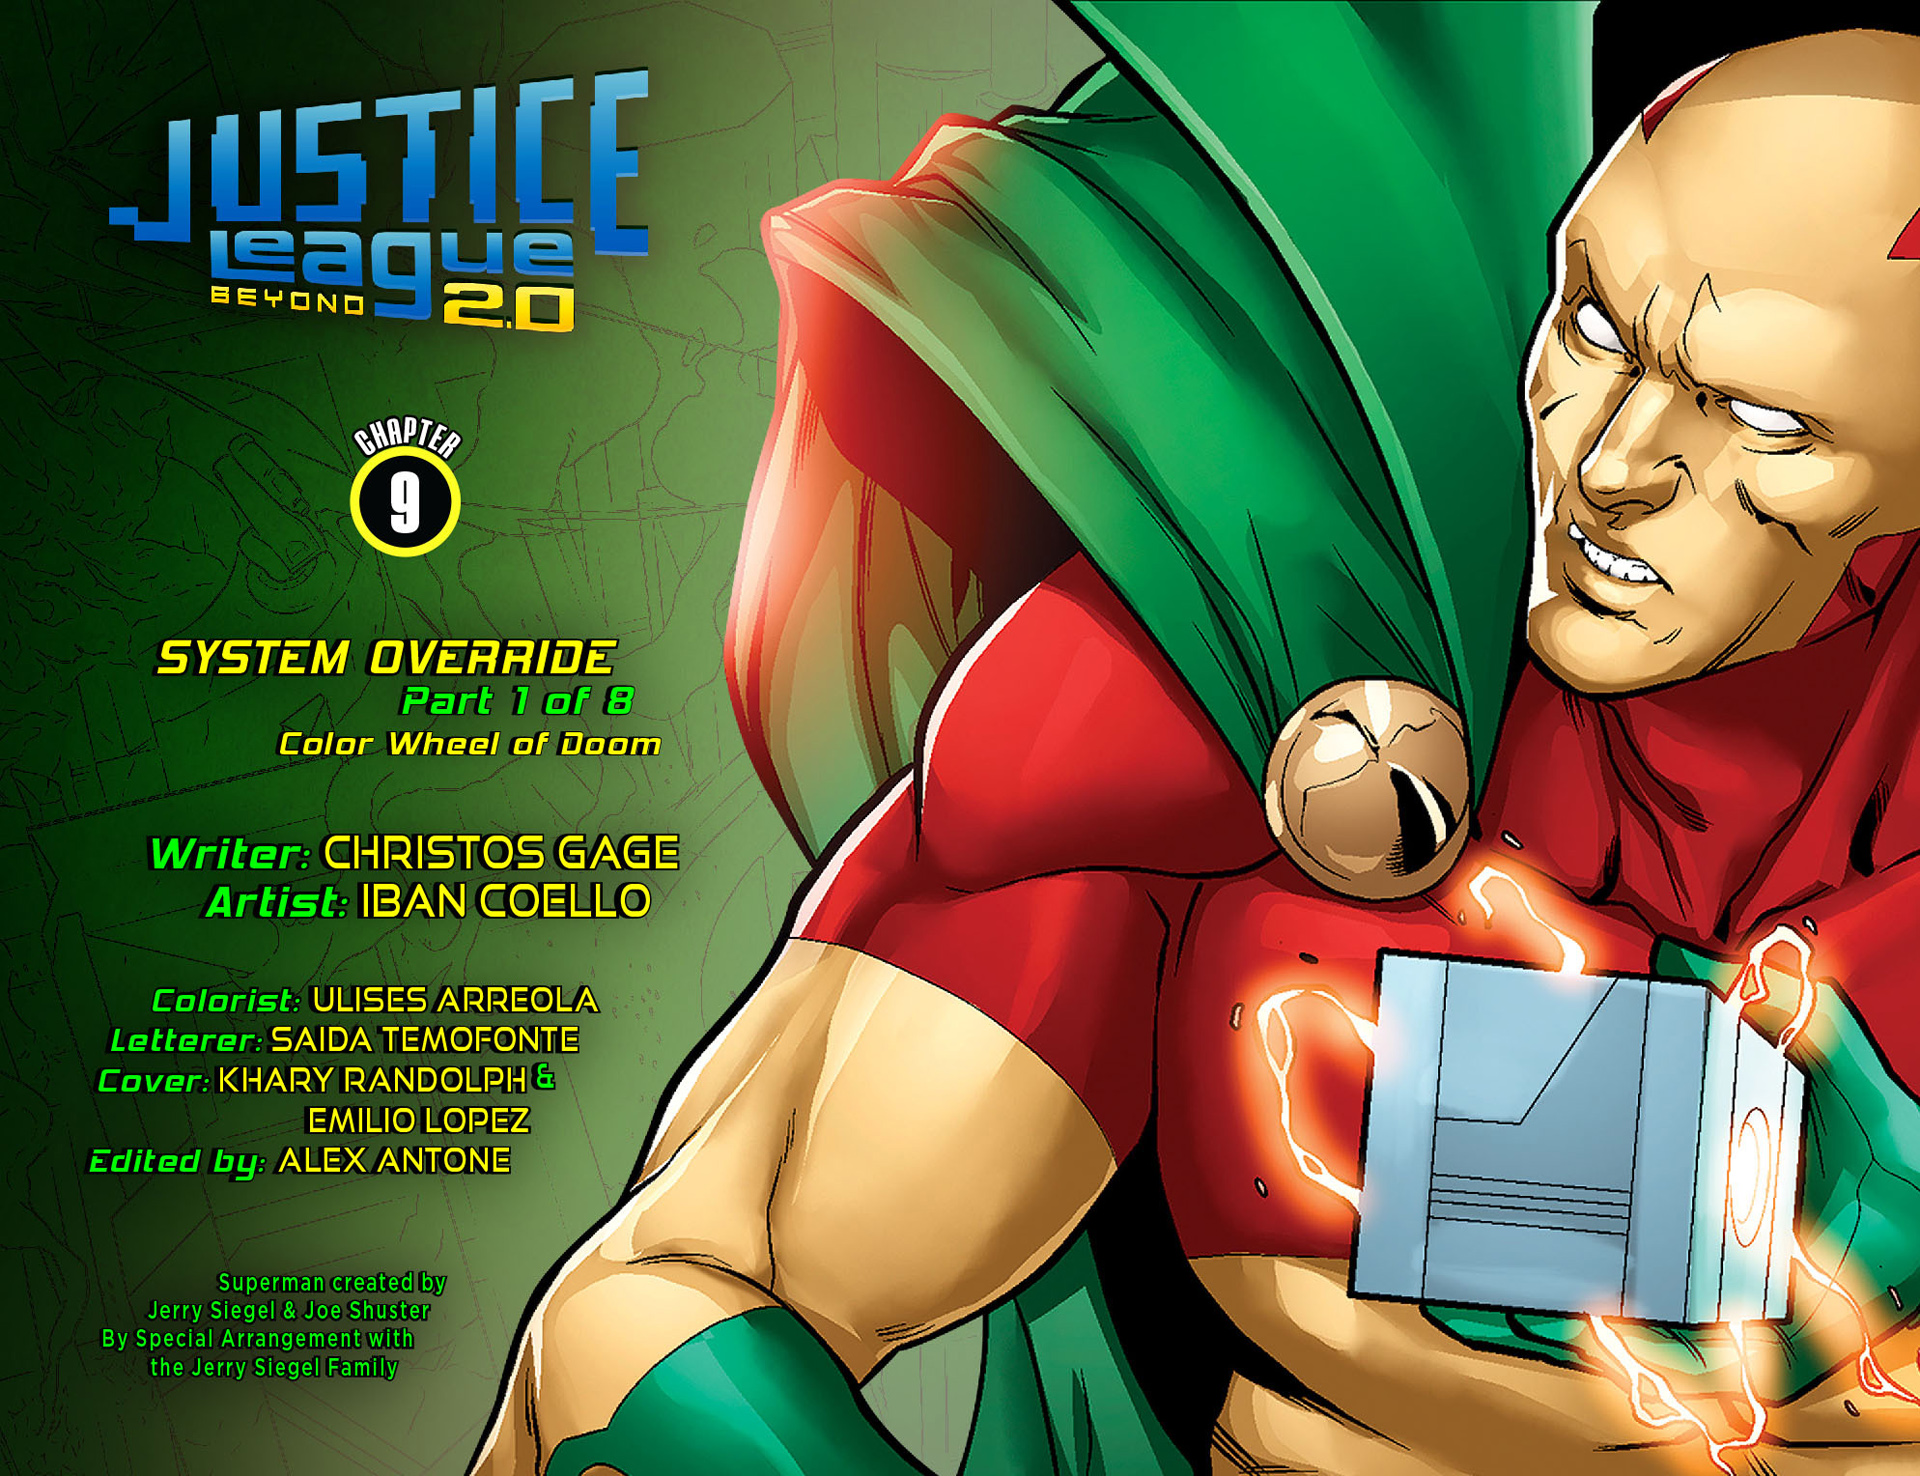 Read online Justice League Beyond 2.0 comic -  Issue #9 - 2